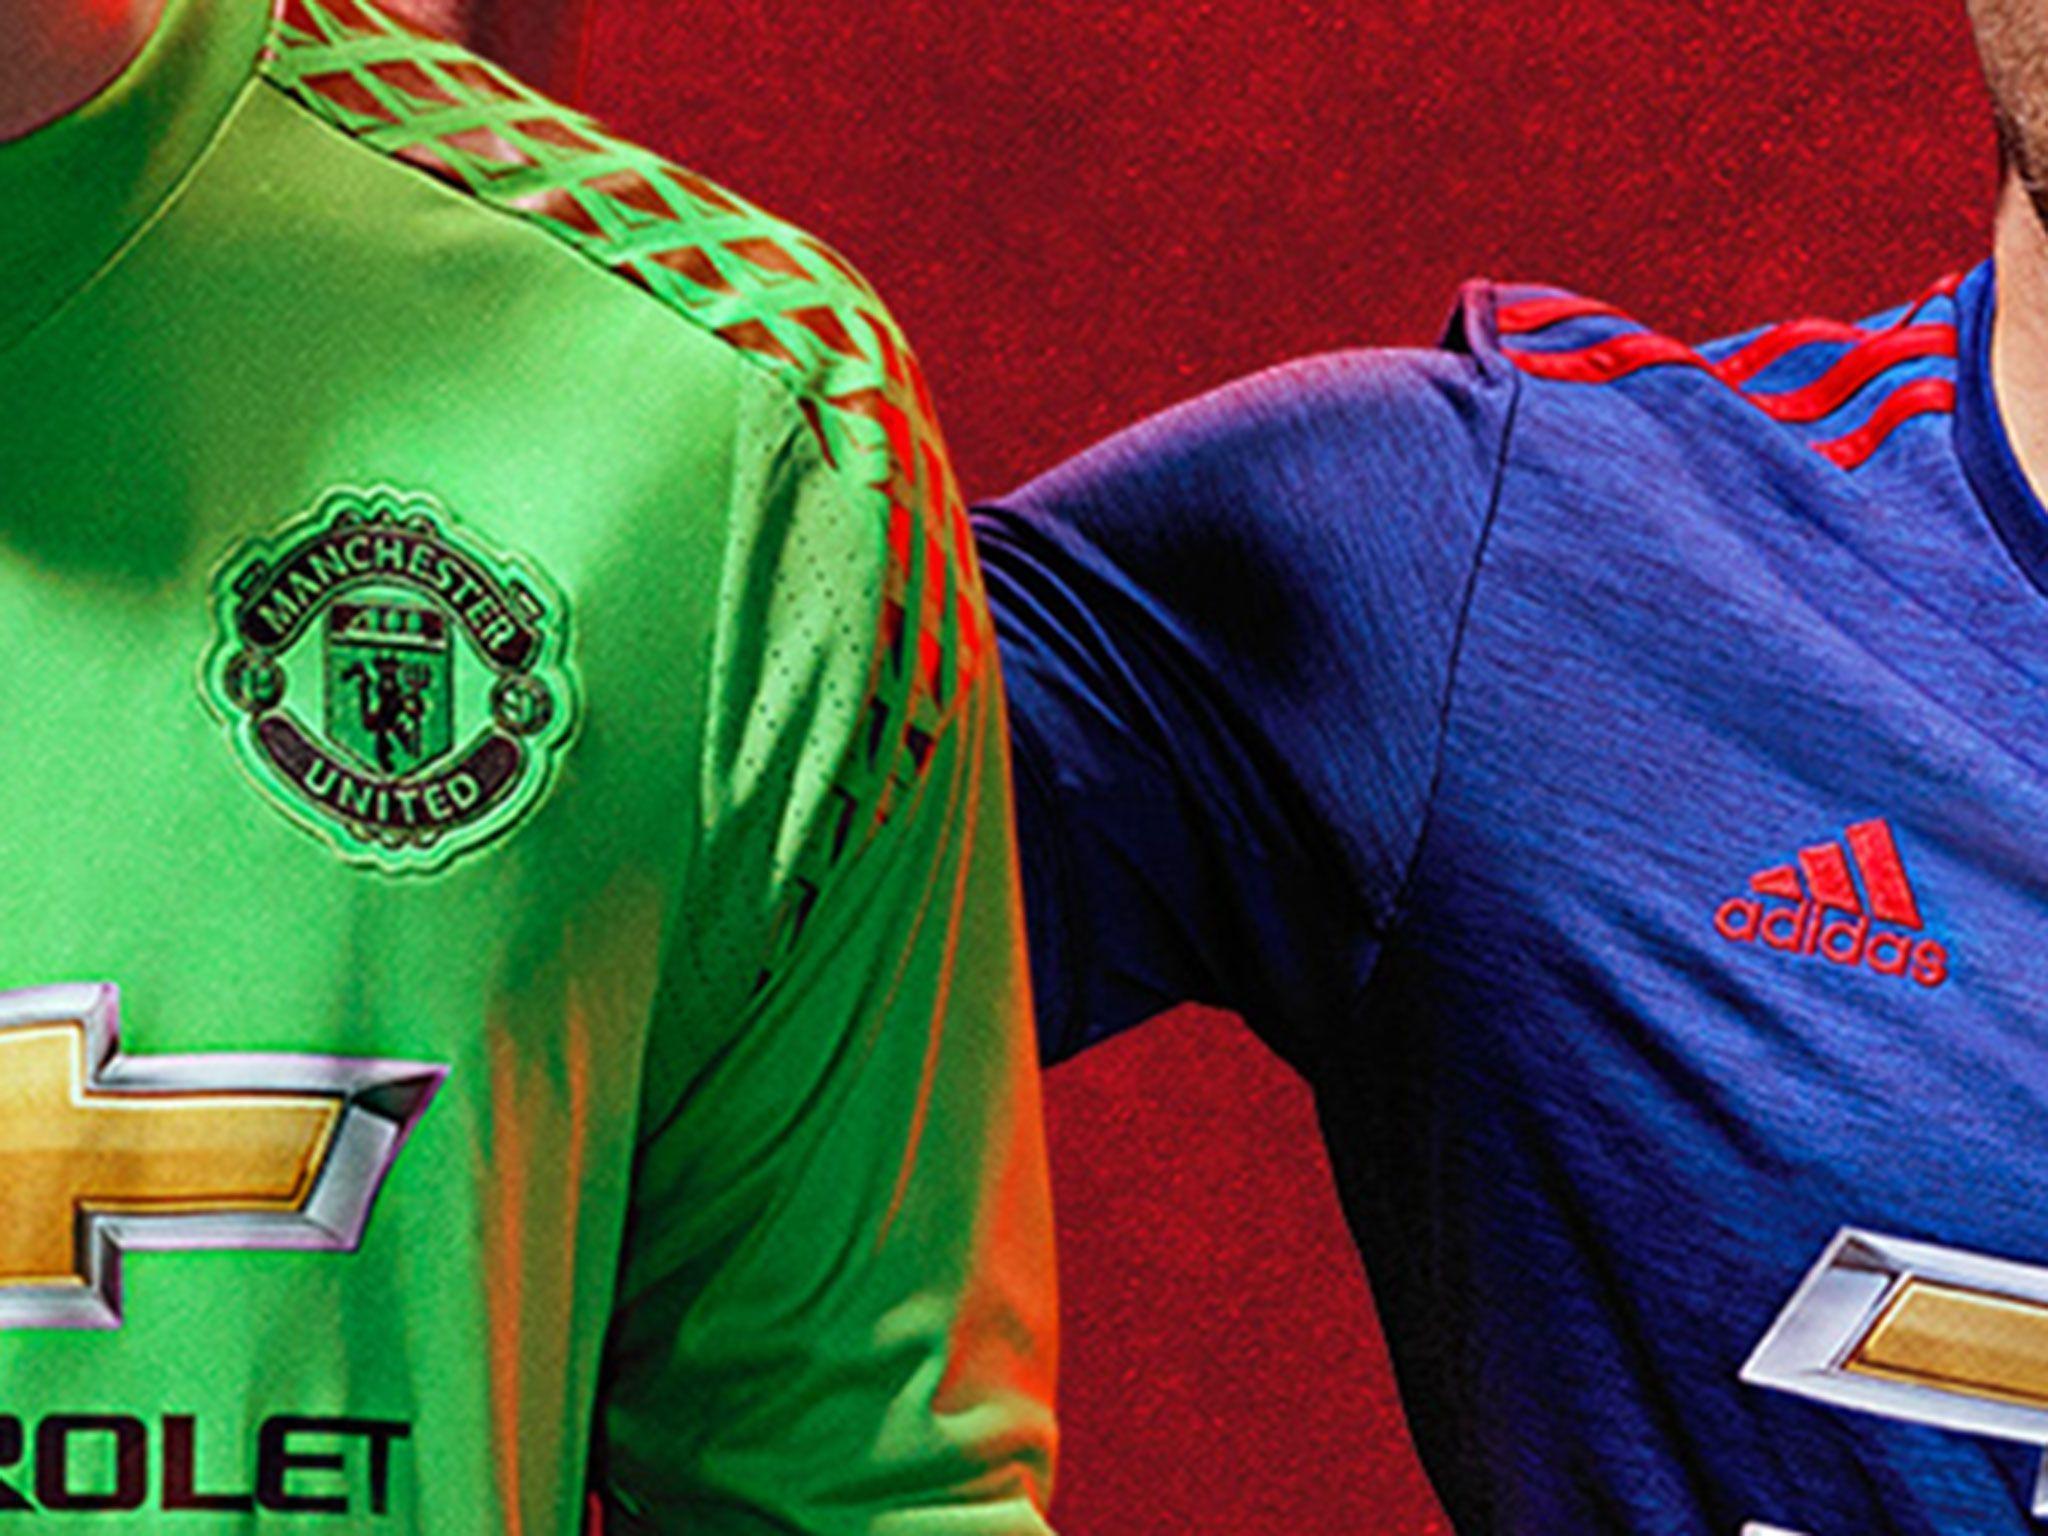 Manchester United away kit revealed: Moody David De Gea features